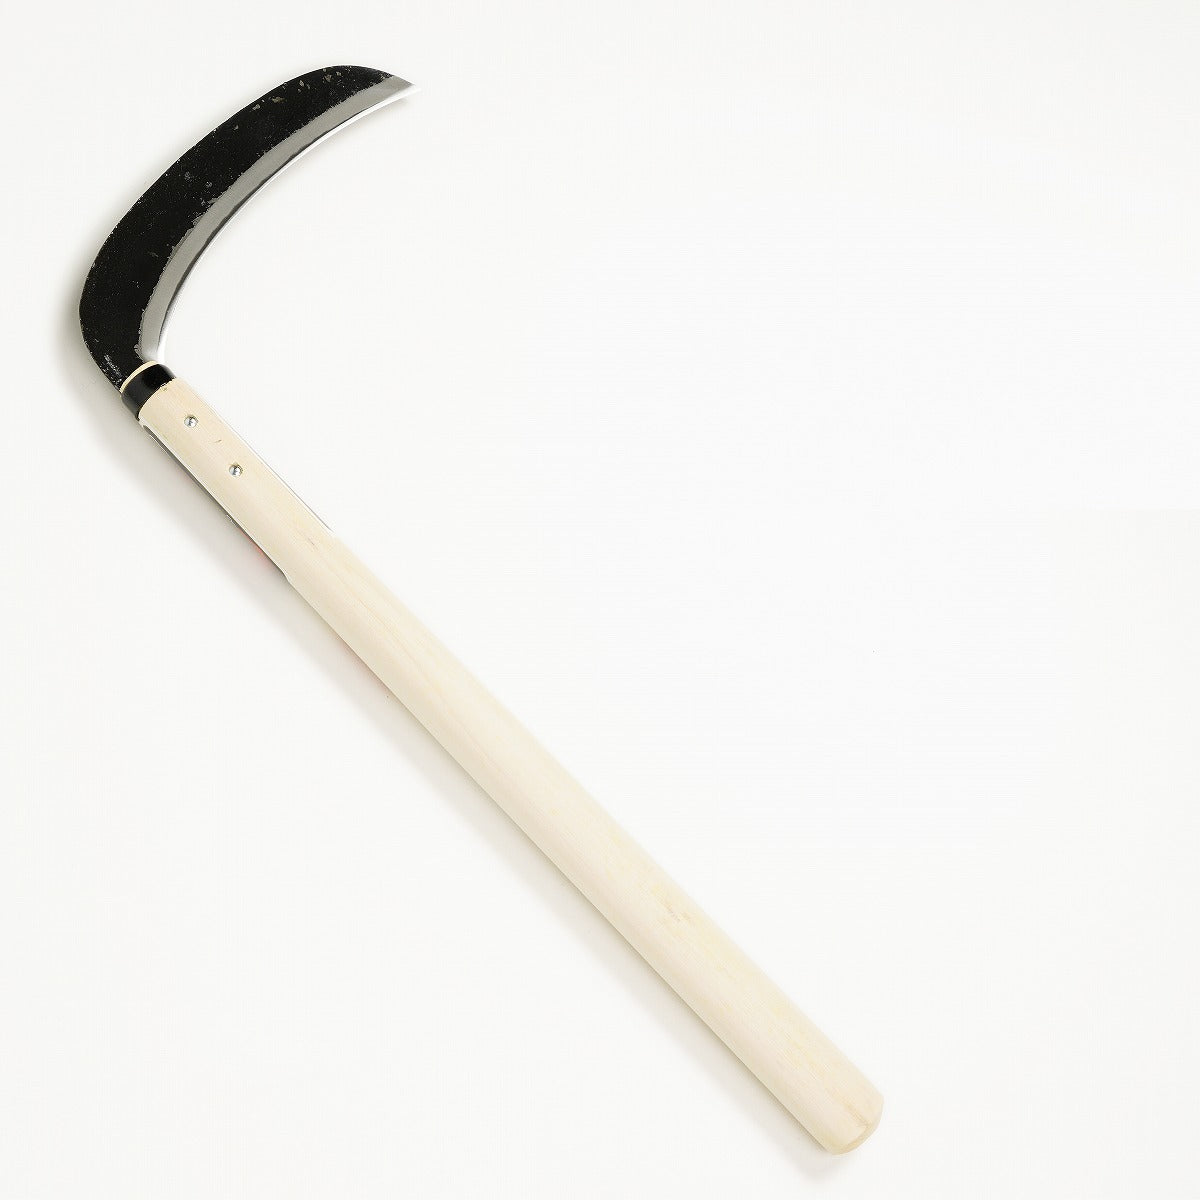 HONMAMON "OJIKA" Aogami Mowing Sickle Middle Thick Blade 180mm(abt 7.1") Double Bevel, Made in Tosa, Japan